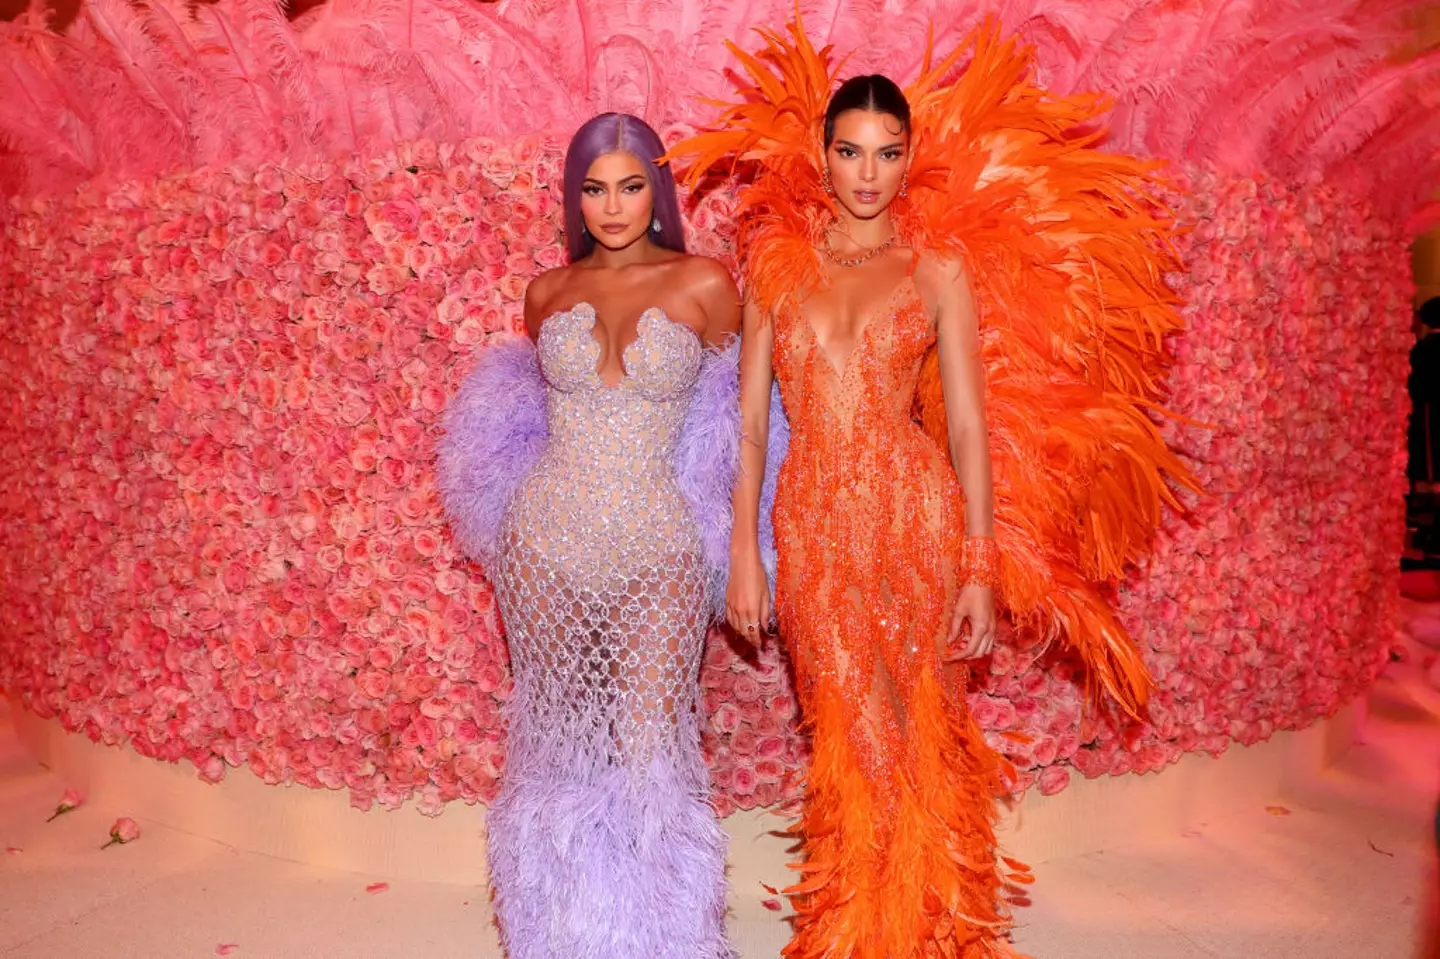 Kendall and Kylie Jenner in feathered Versace designs at the 2019 Met Gala. (Kevin Tachman/MG19/Getty Images for The Met Museum/Vogue)